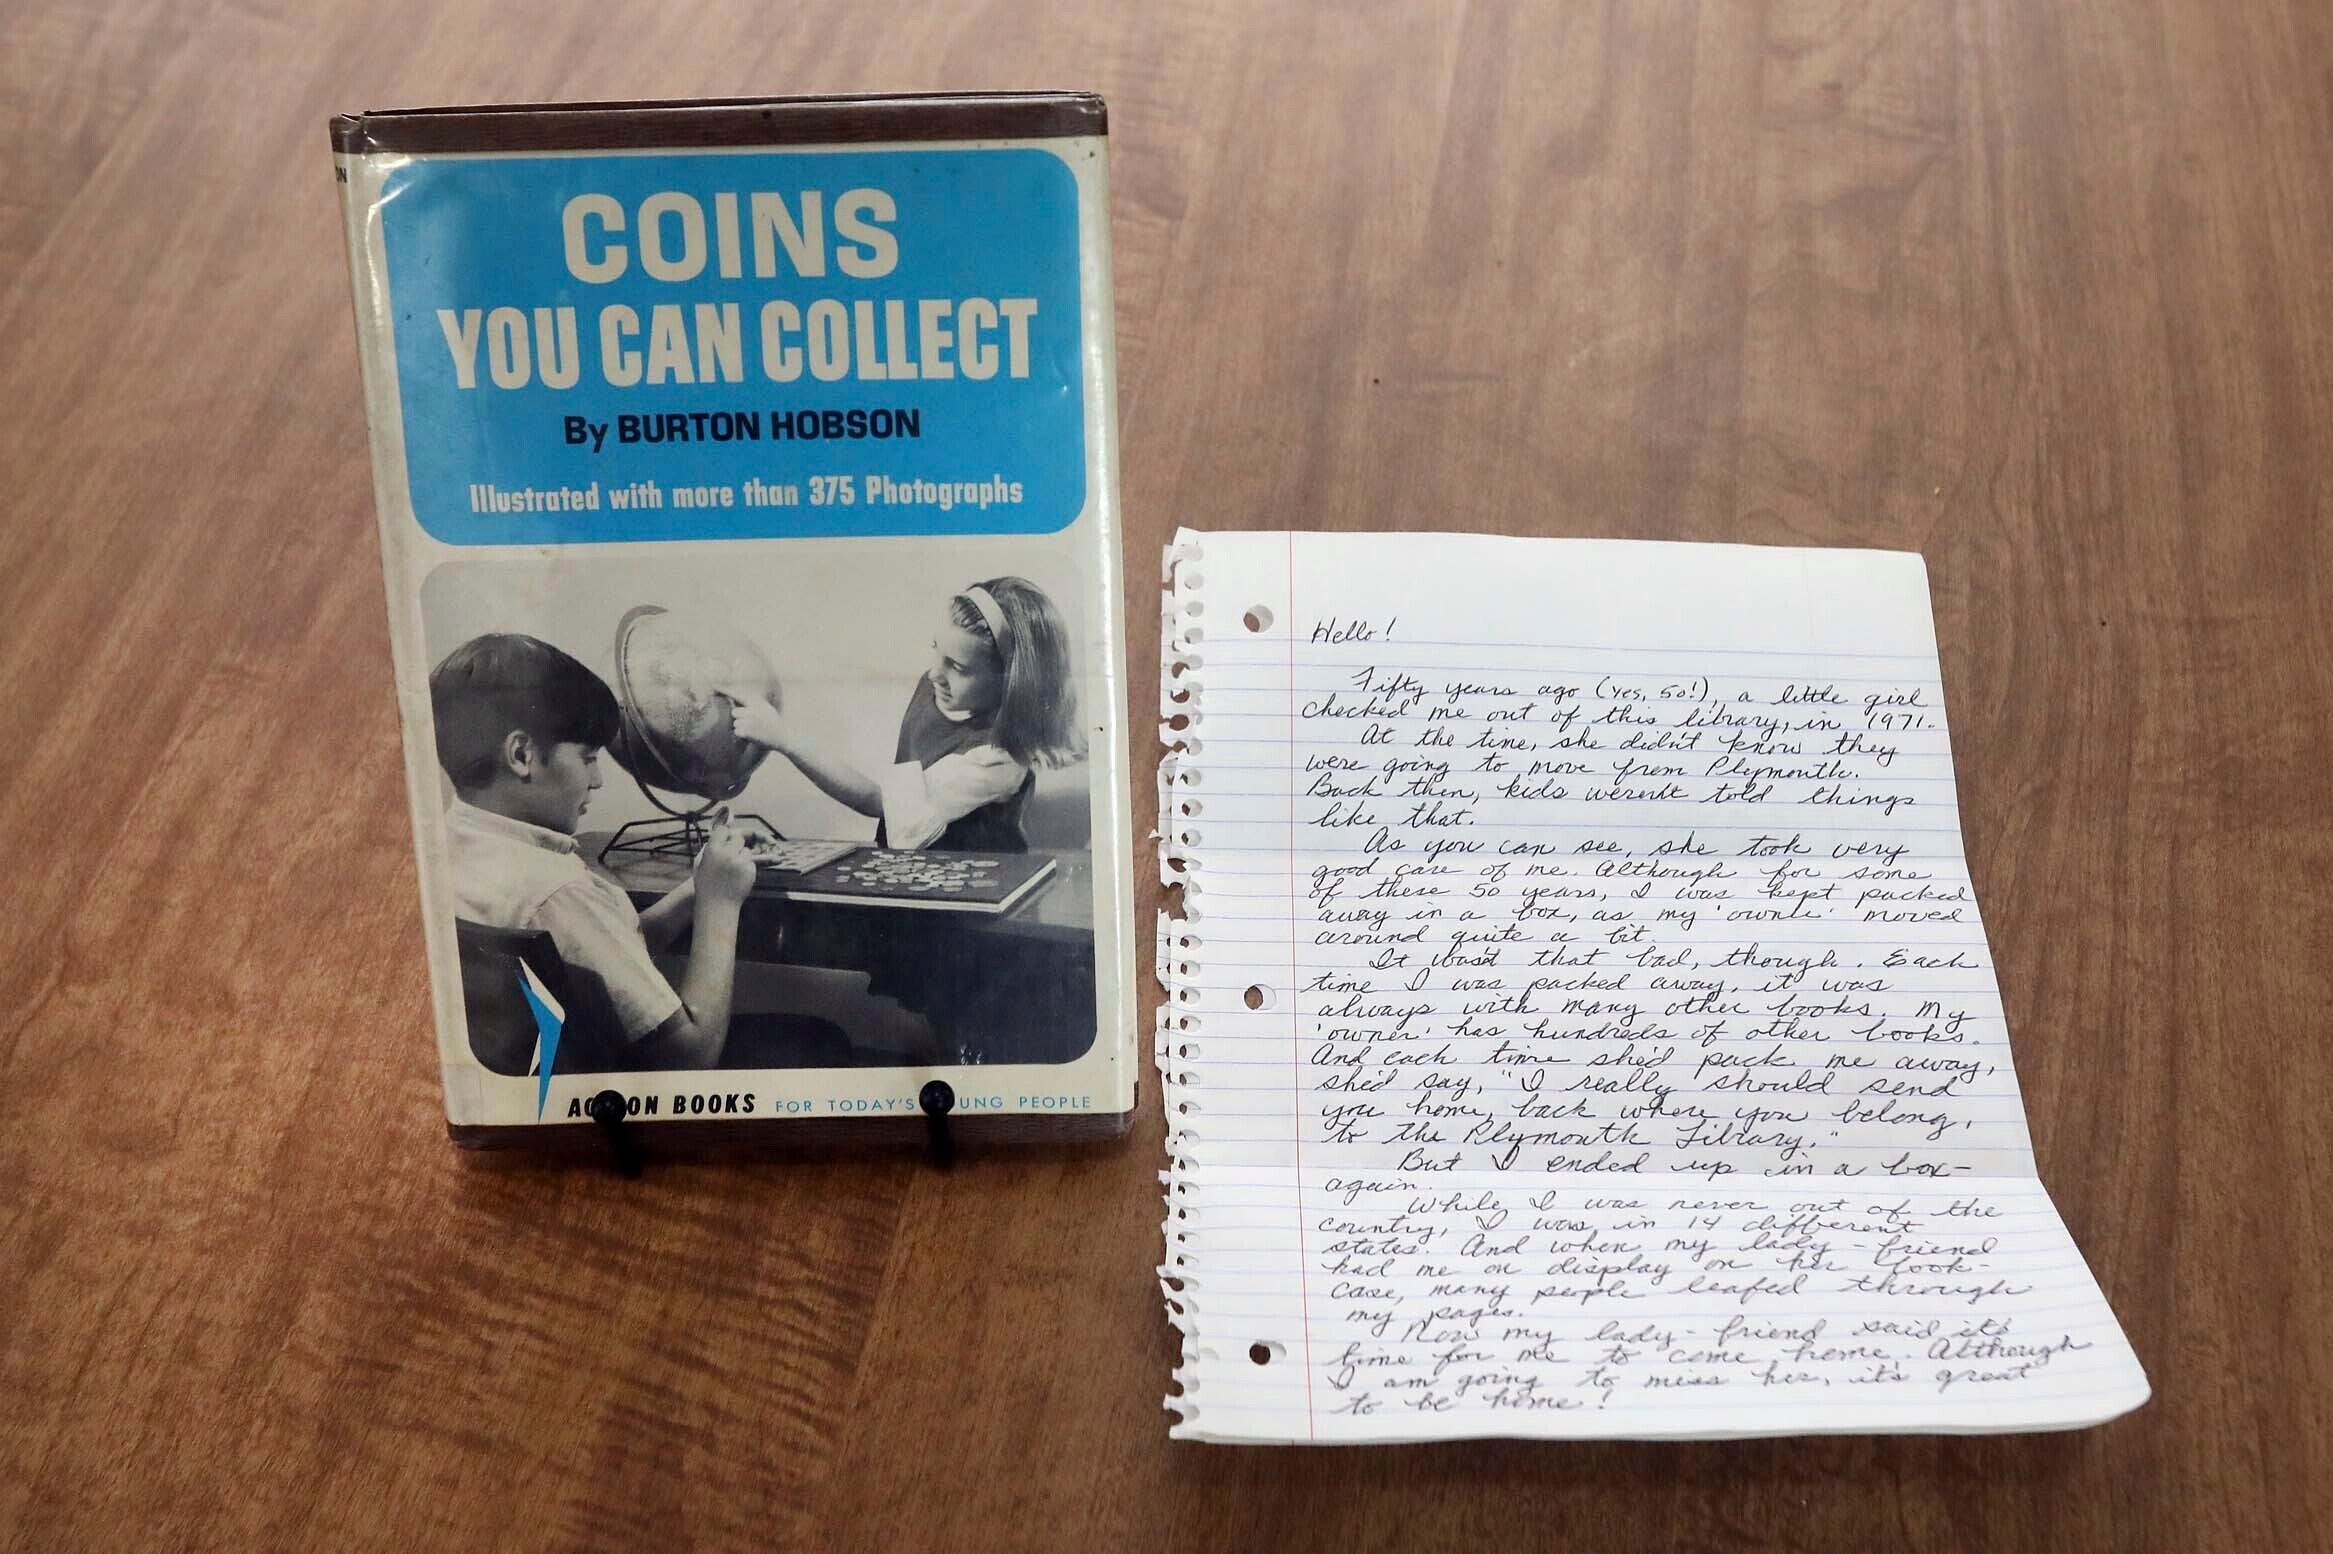 ODD Library Book Returned After 50 Years